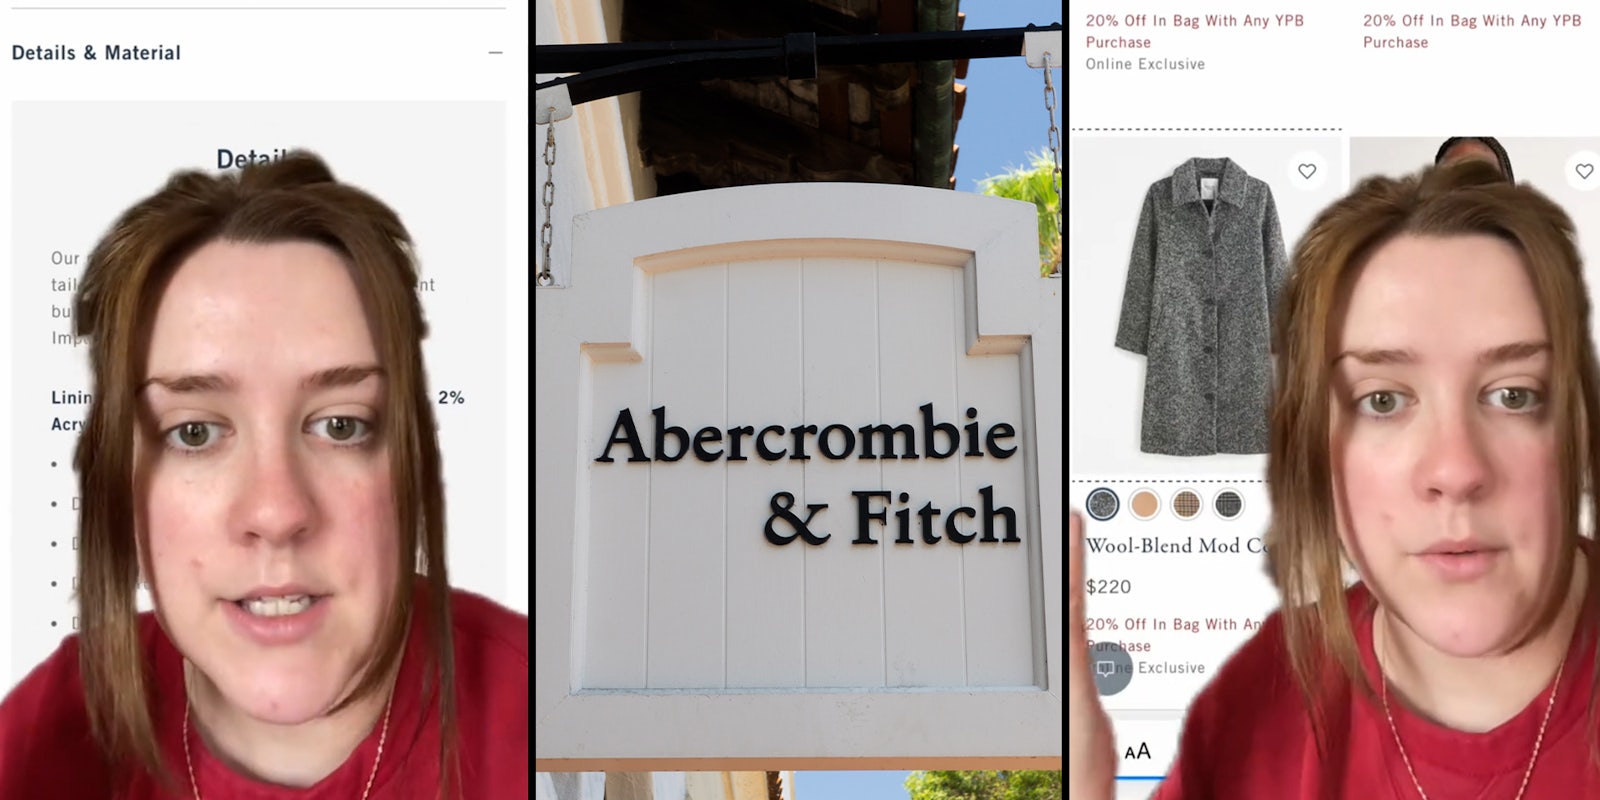 Customer calls out Abercrombie after they advertised a 100% polyester coat as wool